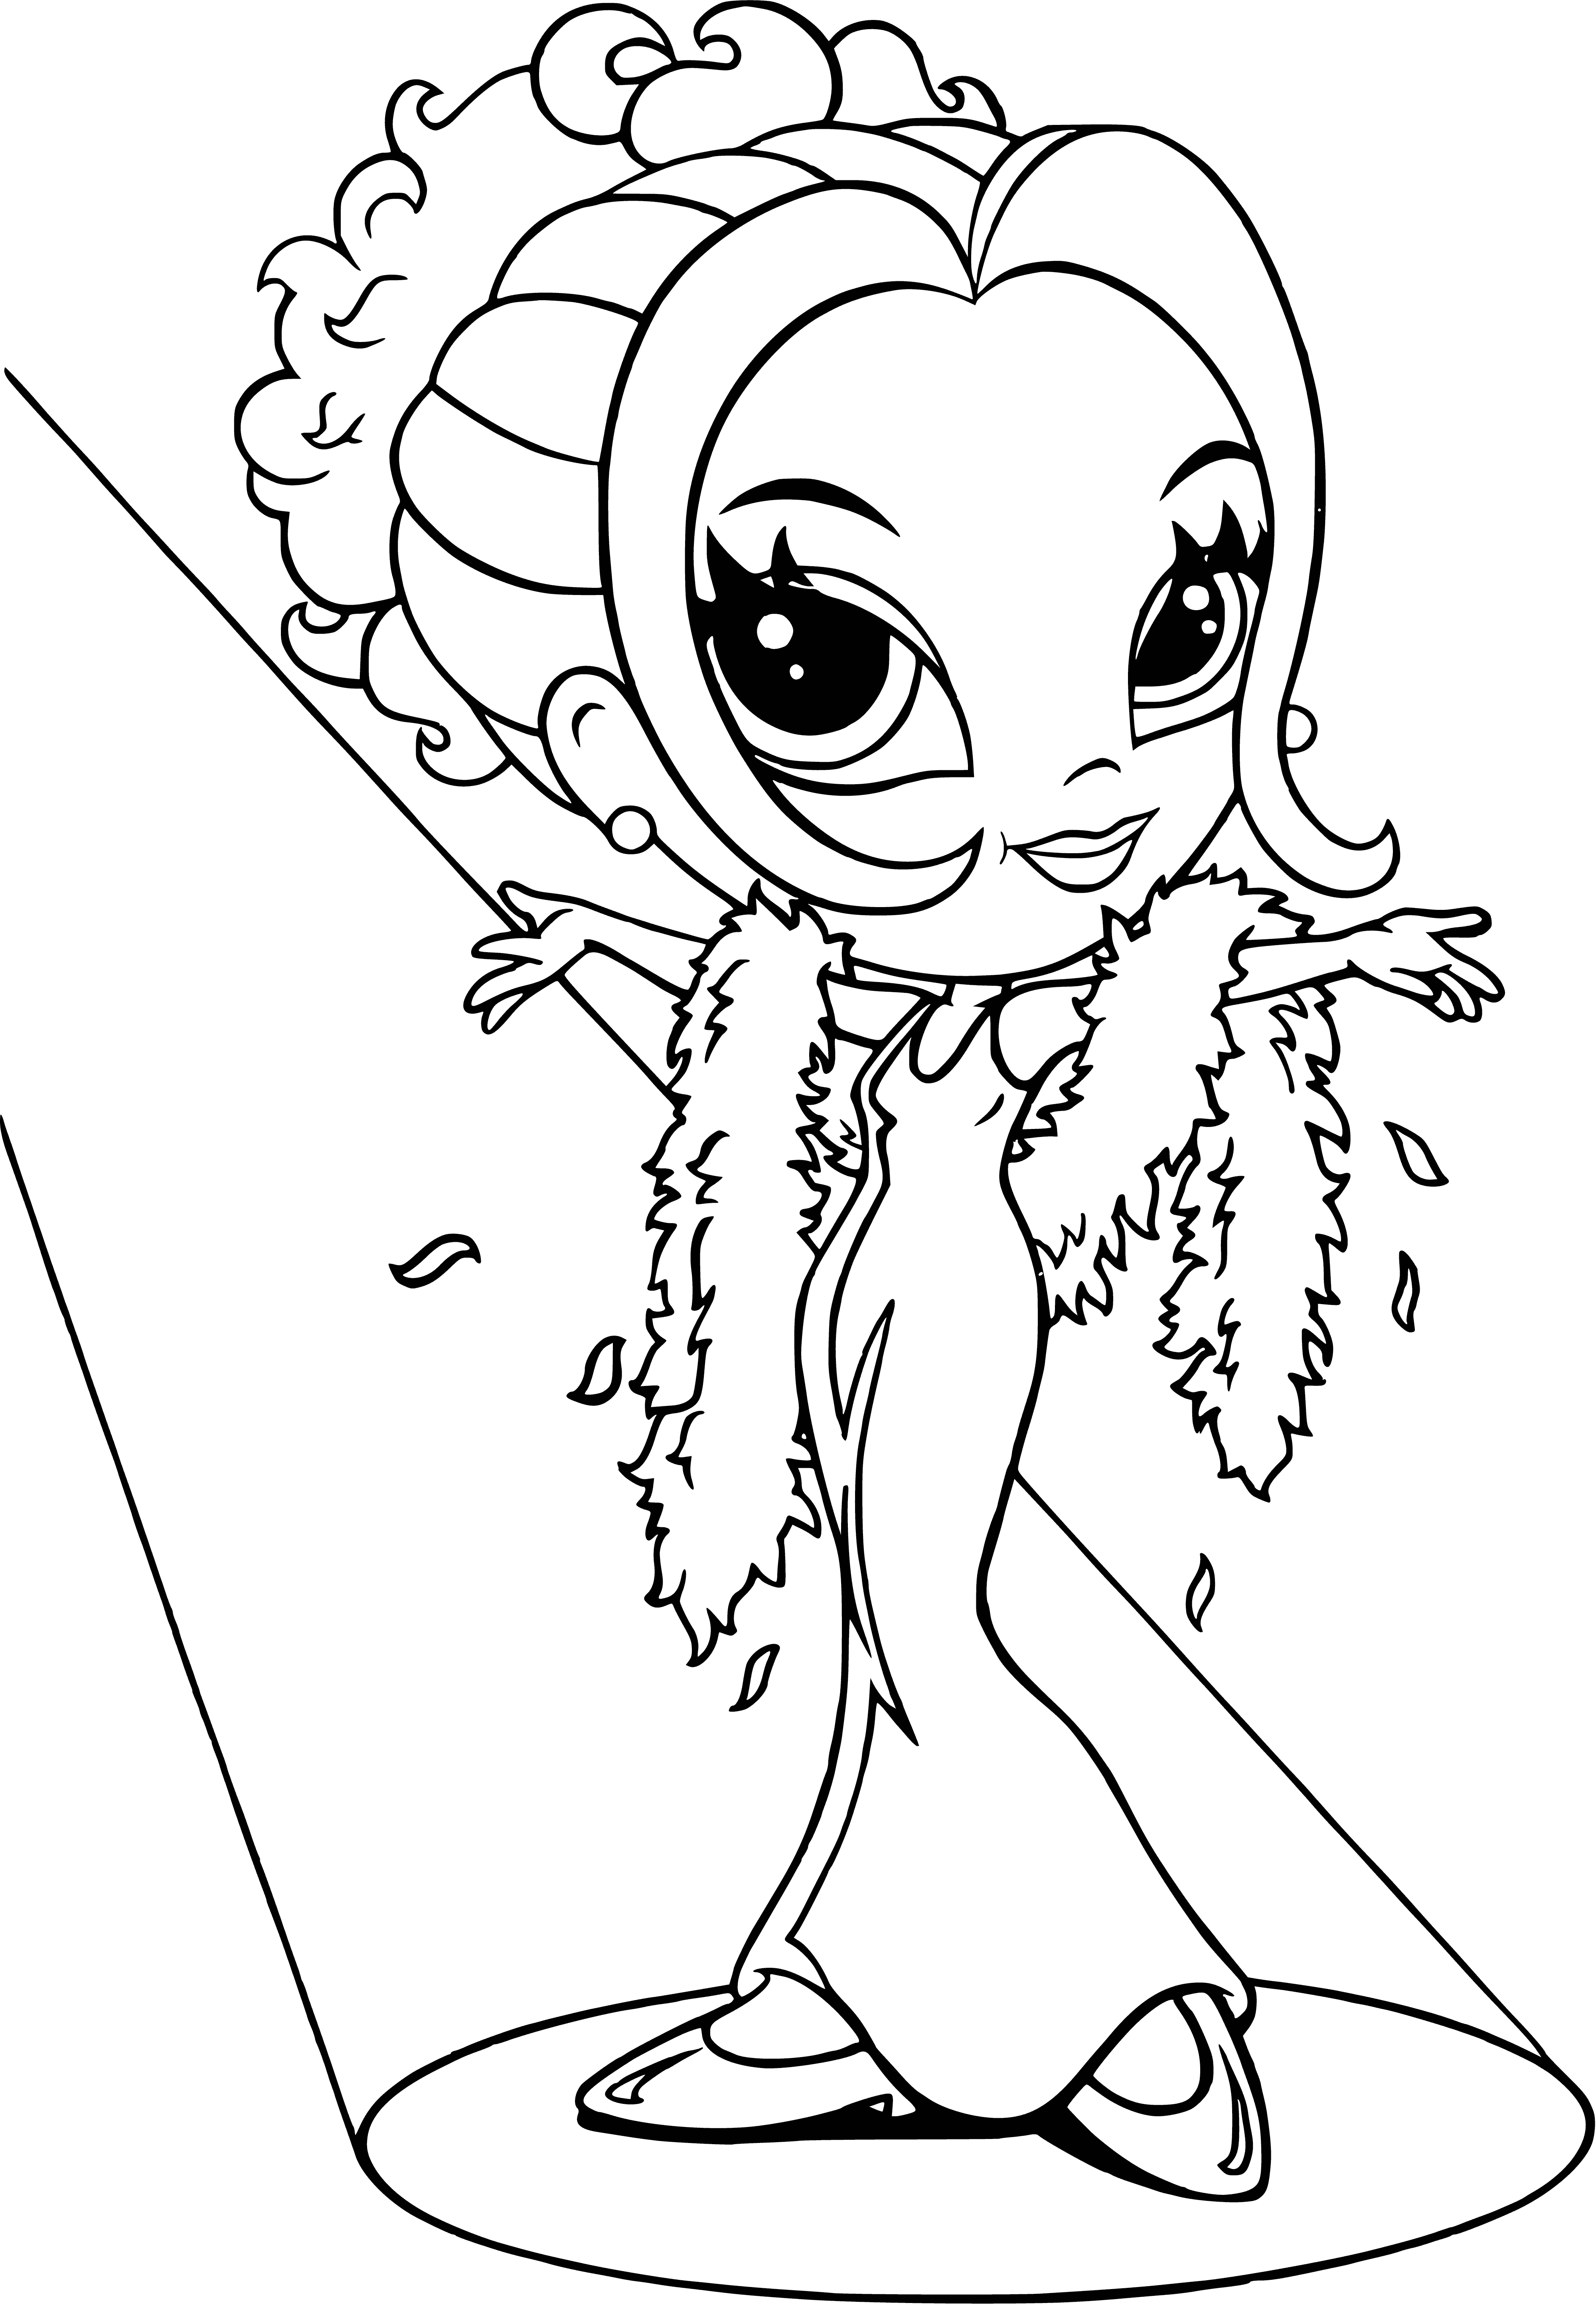 coloring page: Glam girl in pink dress holds a fan. Hair up in bun, earrings, necklace & bow. Ready for a glamorous night out!